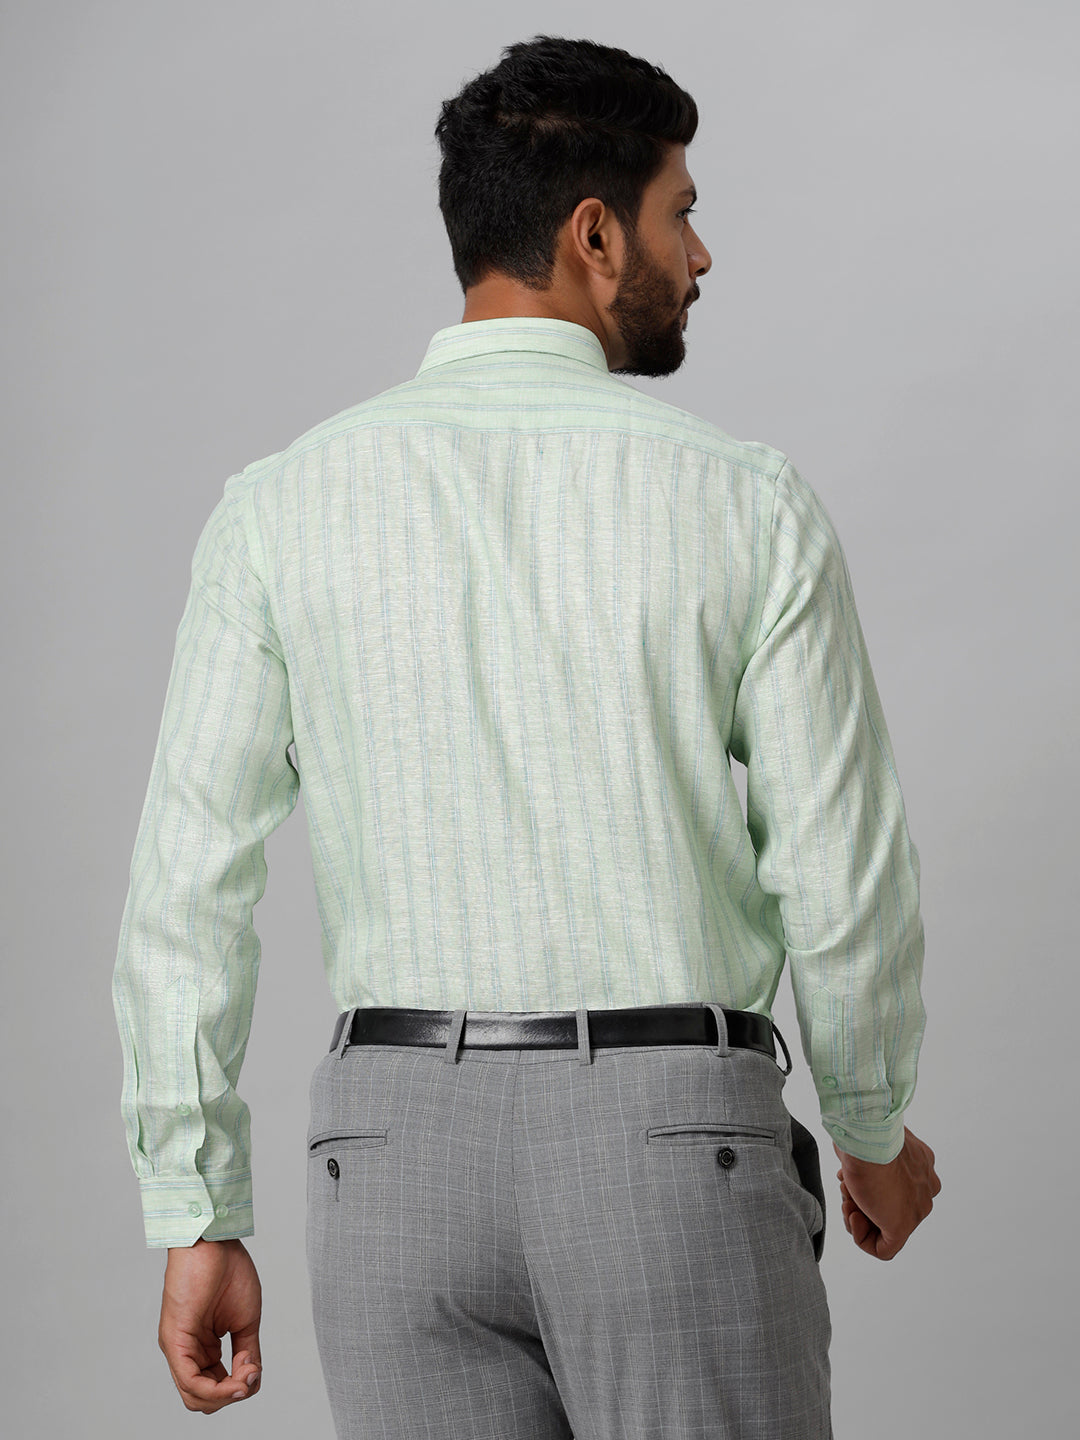 Mens Pure Linen Striped Full Sleeves Pista Green Shirt LS10-Back view